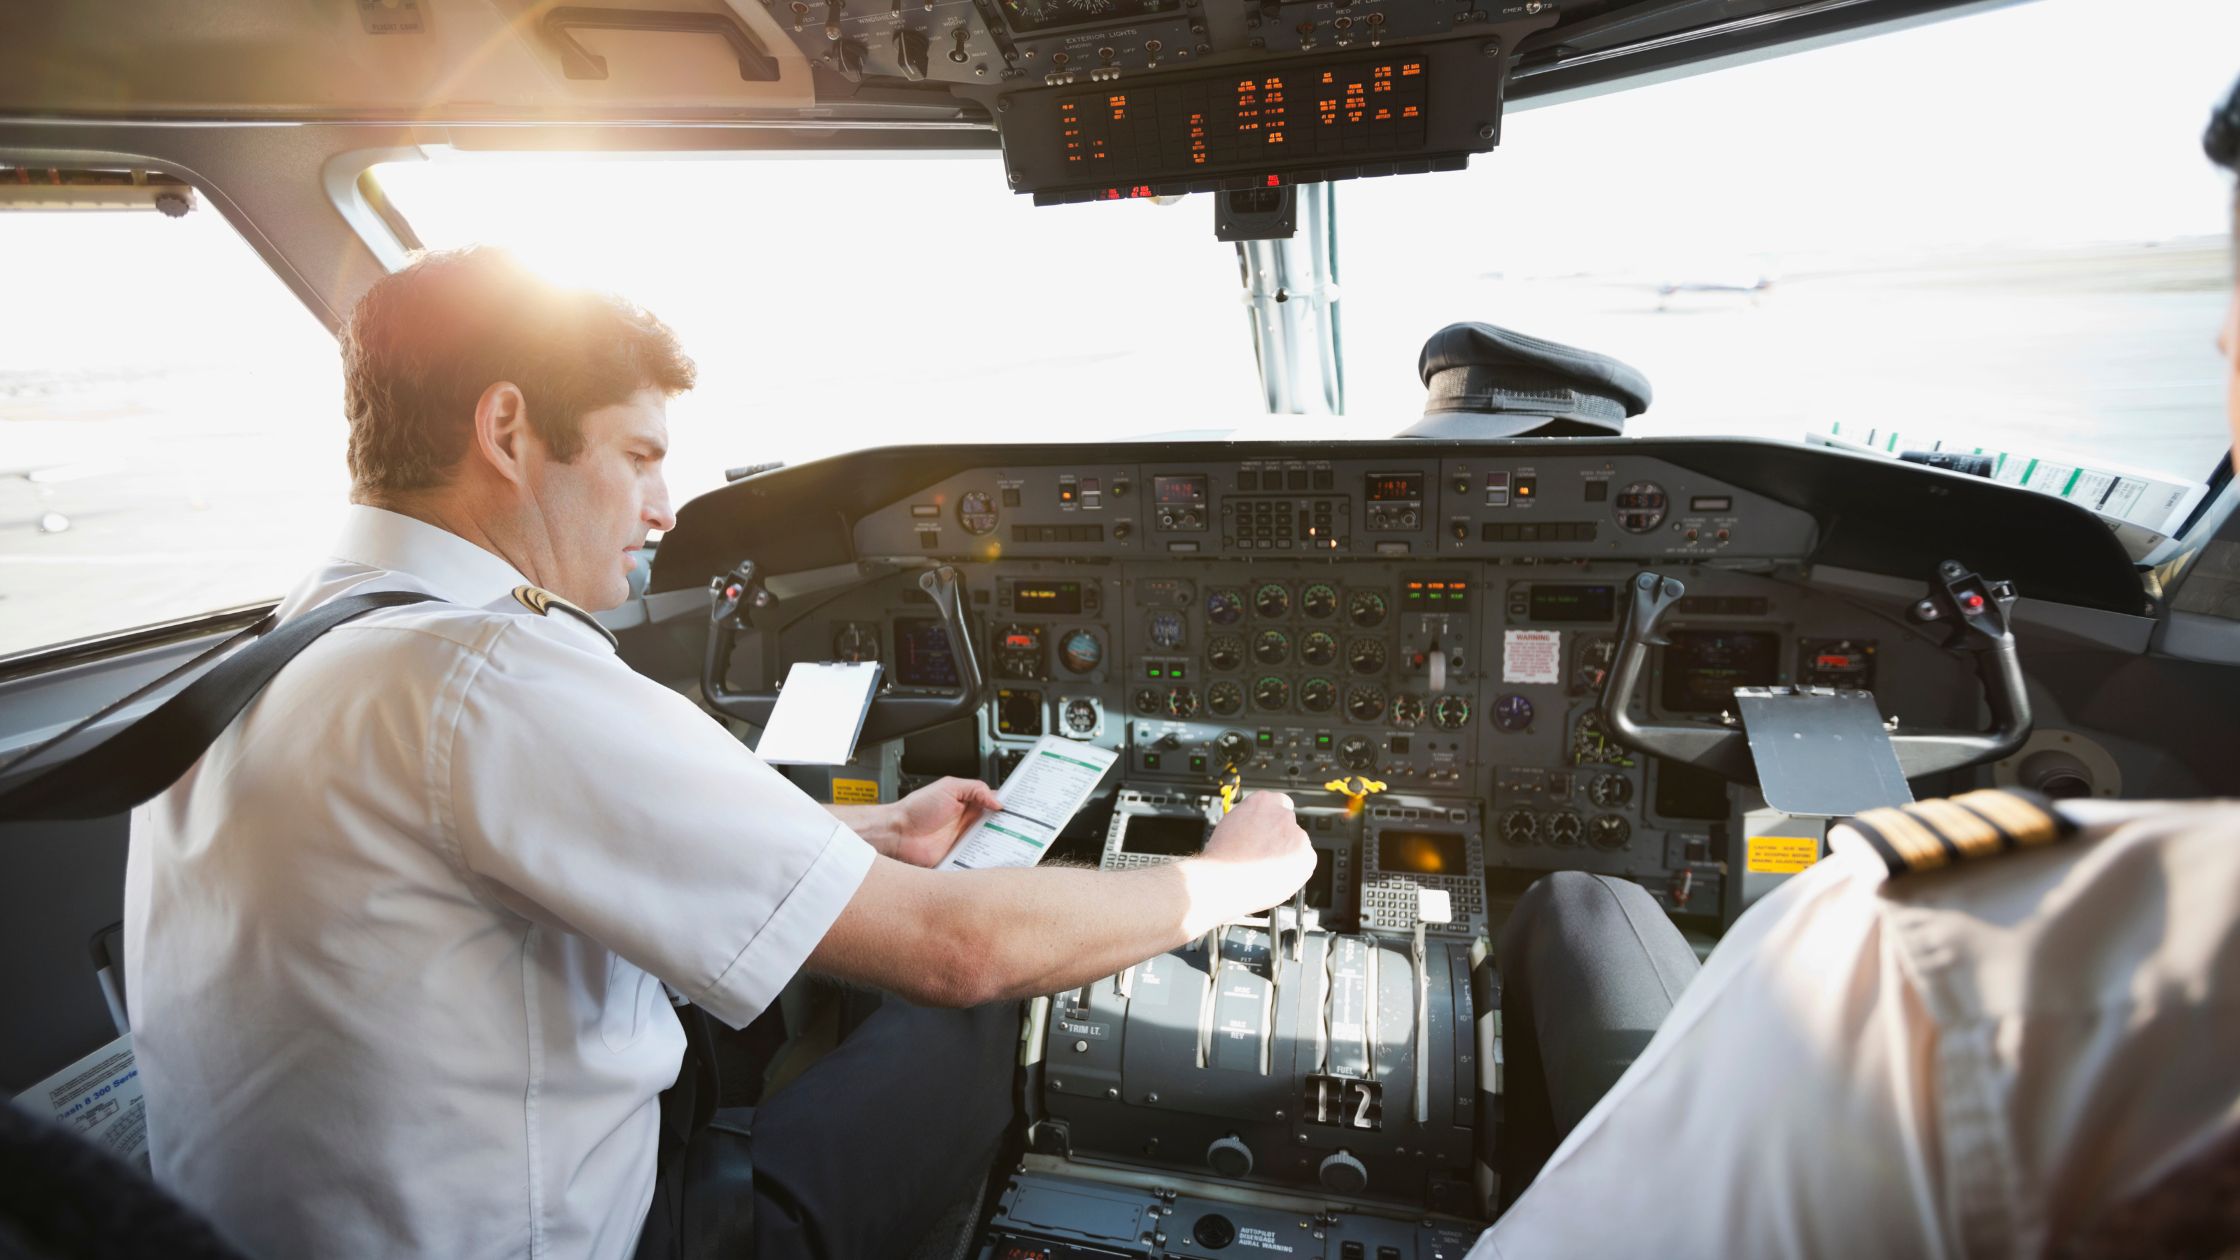 Drug and alcohol testing in high risk industries such as aviation